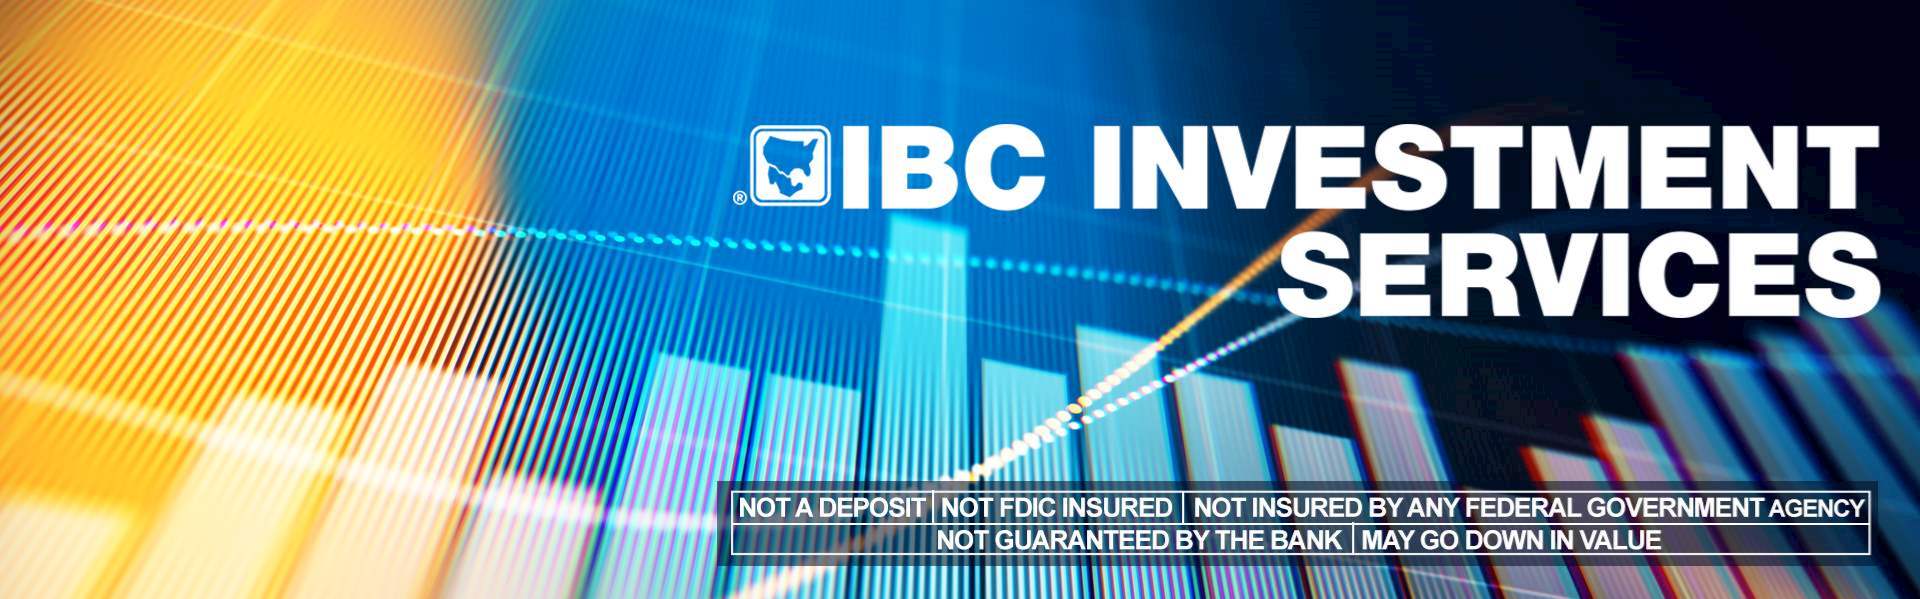 IBC Bank Business Investments